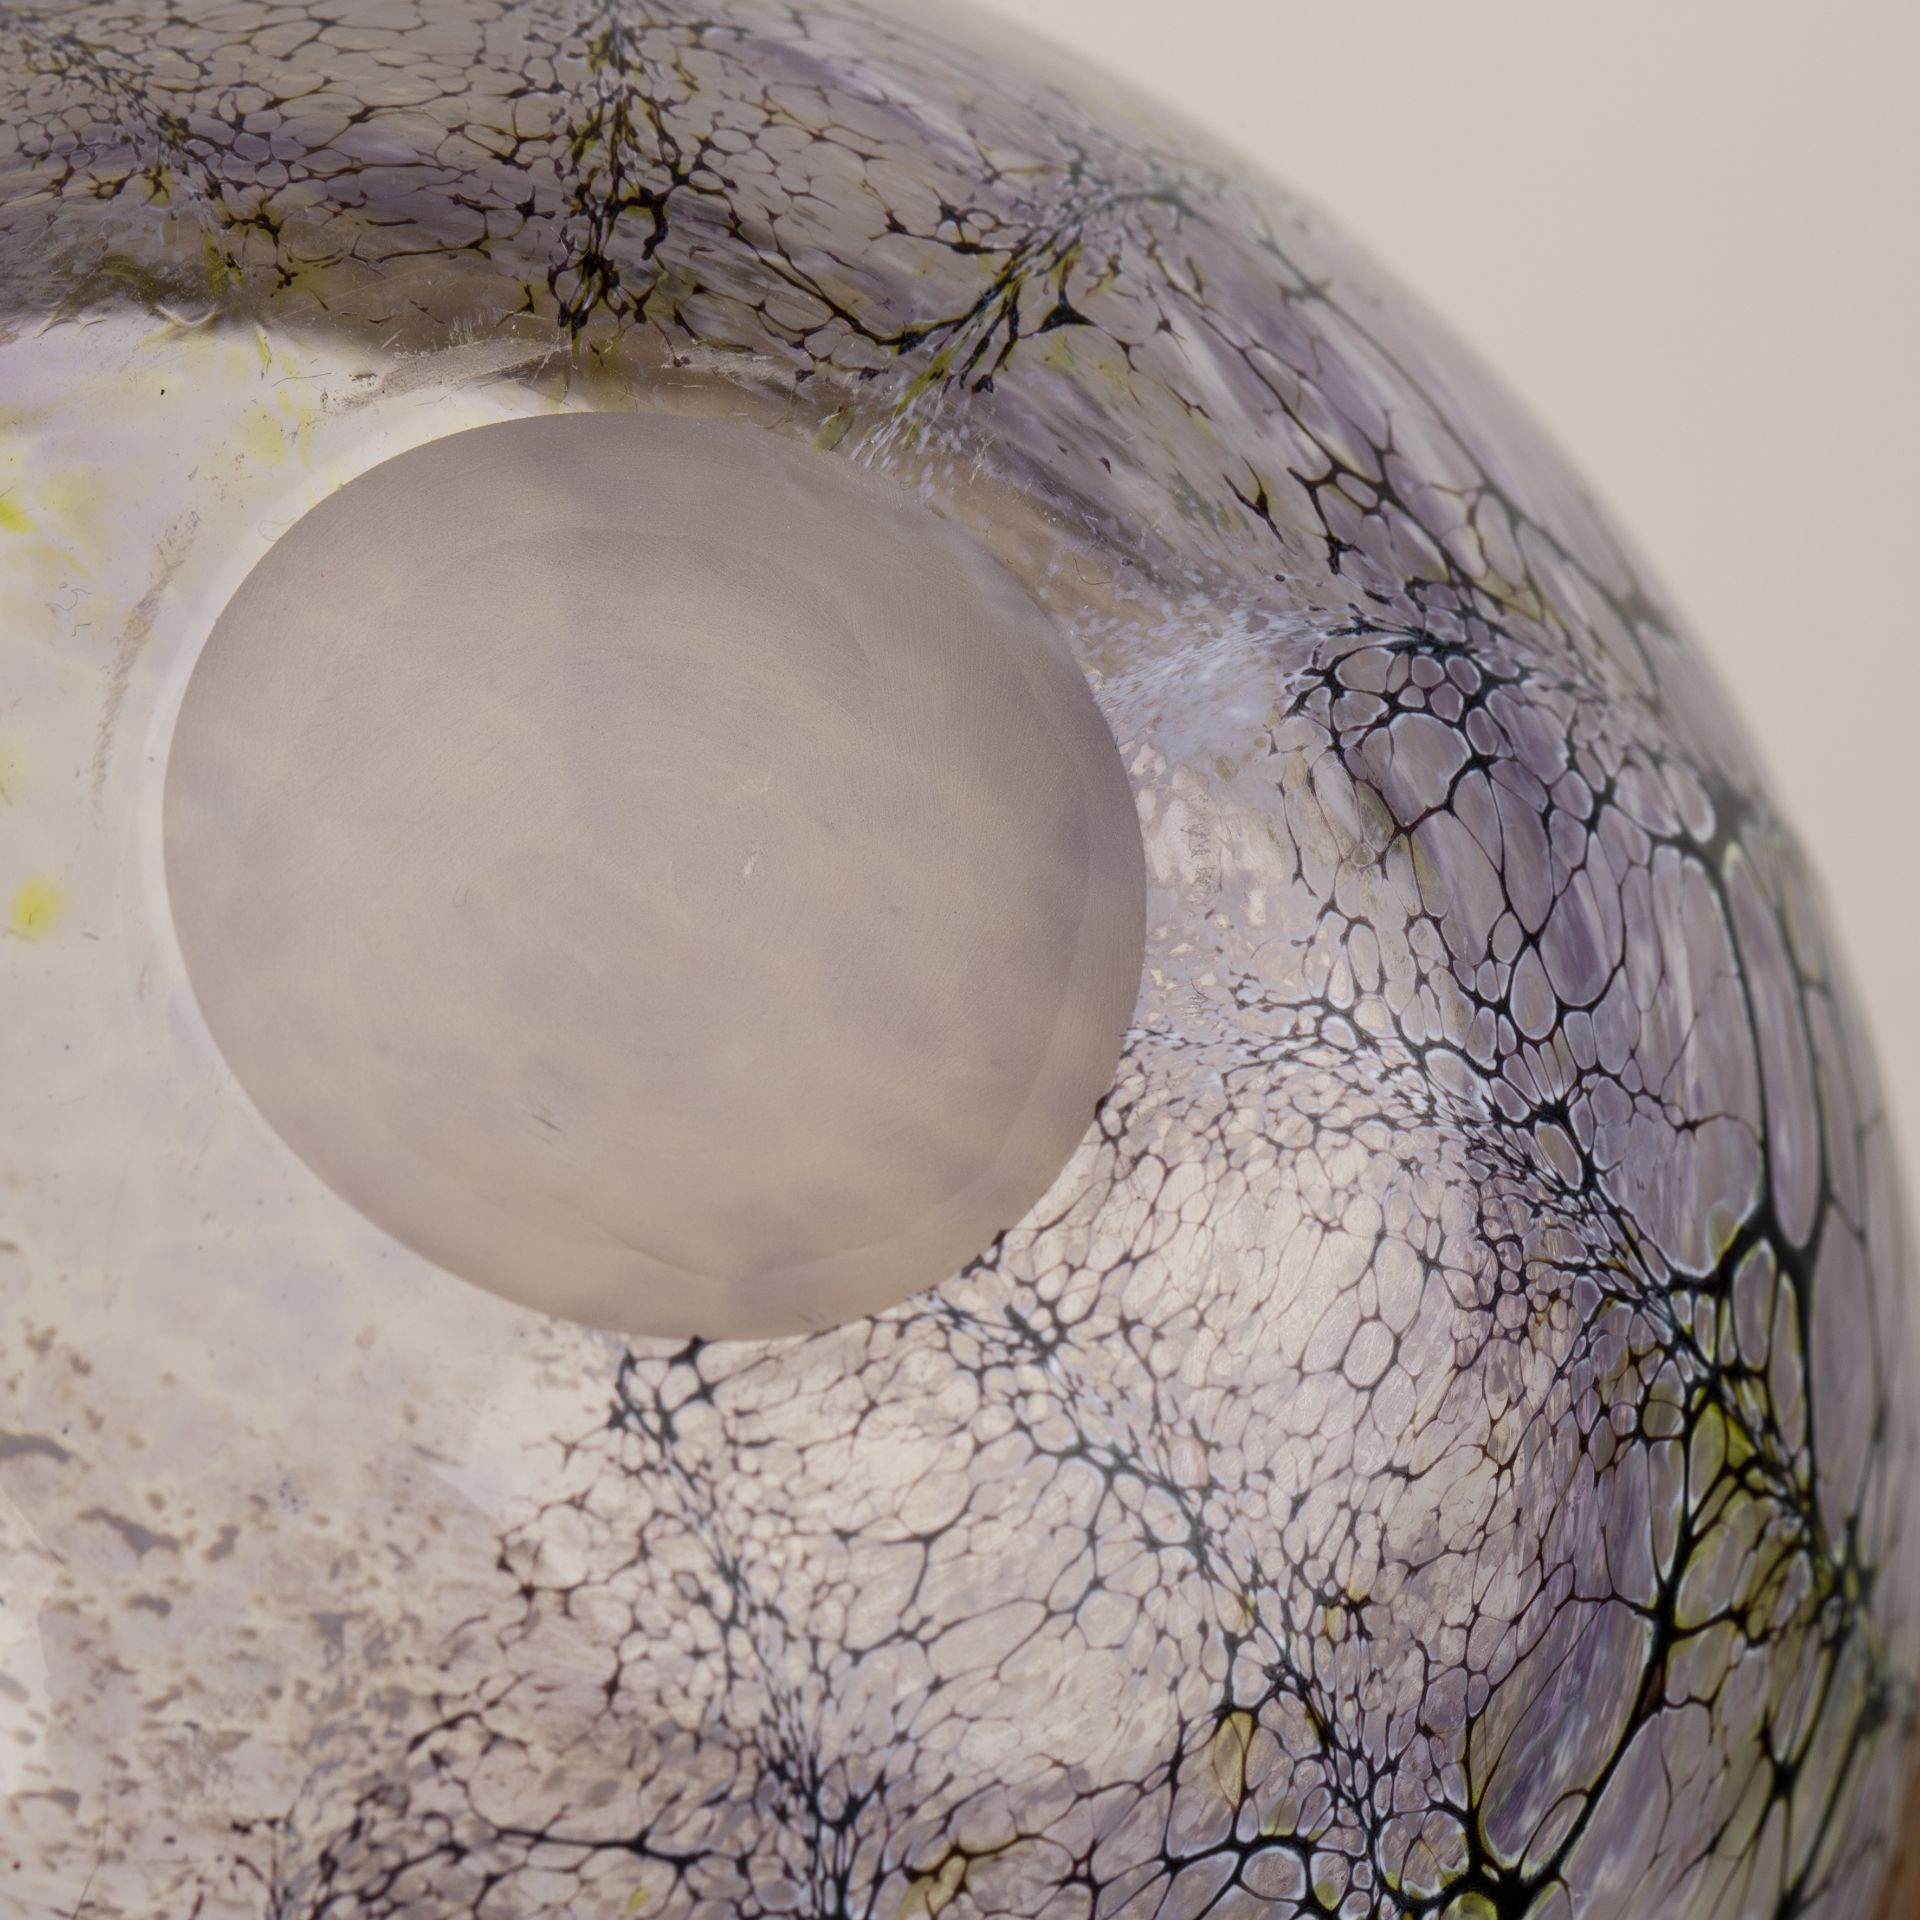 Stephen Foster (Contemporary) collection of studio glass, comprising a large bell-shaped bowl, - Image 3 of 6